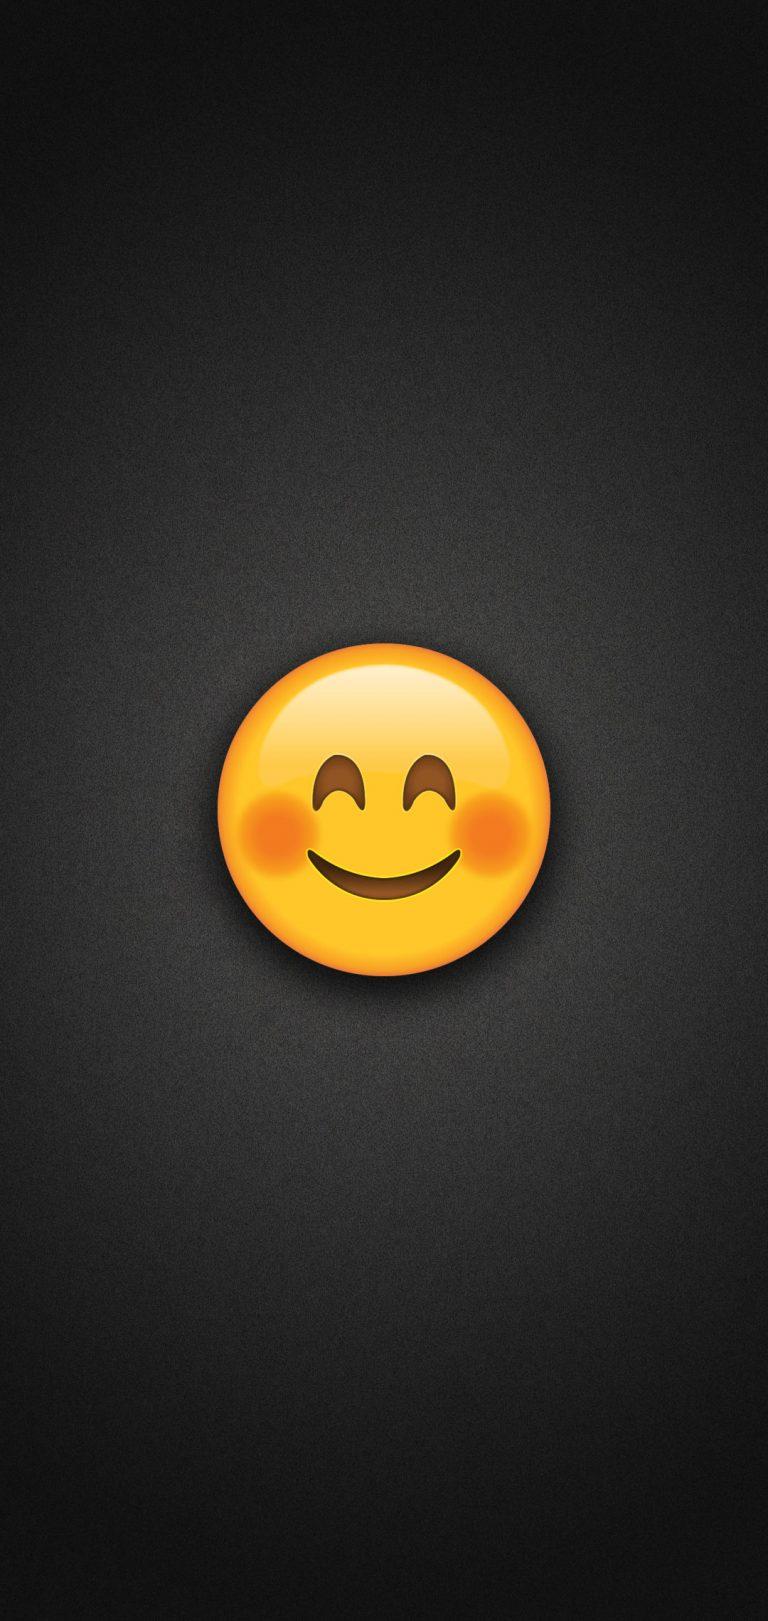 Smiling Face Emoji with Blushed Cheeks Phone Wallpaper